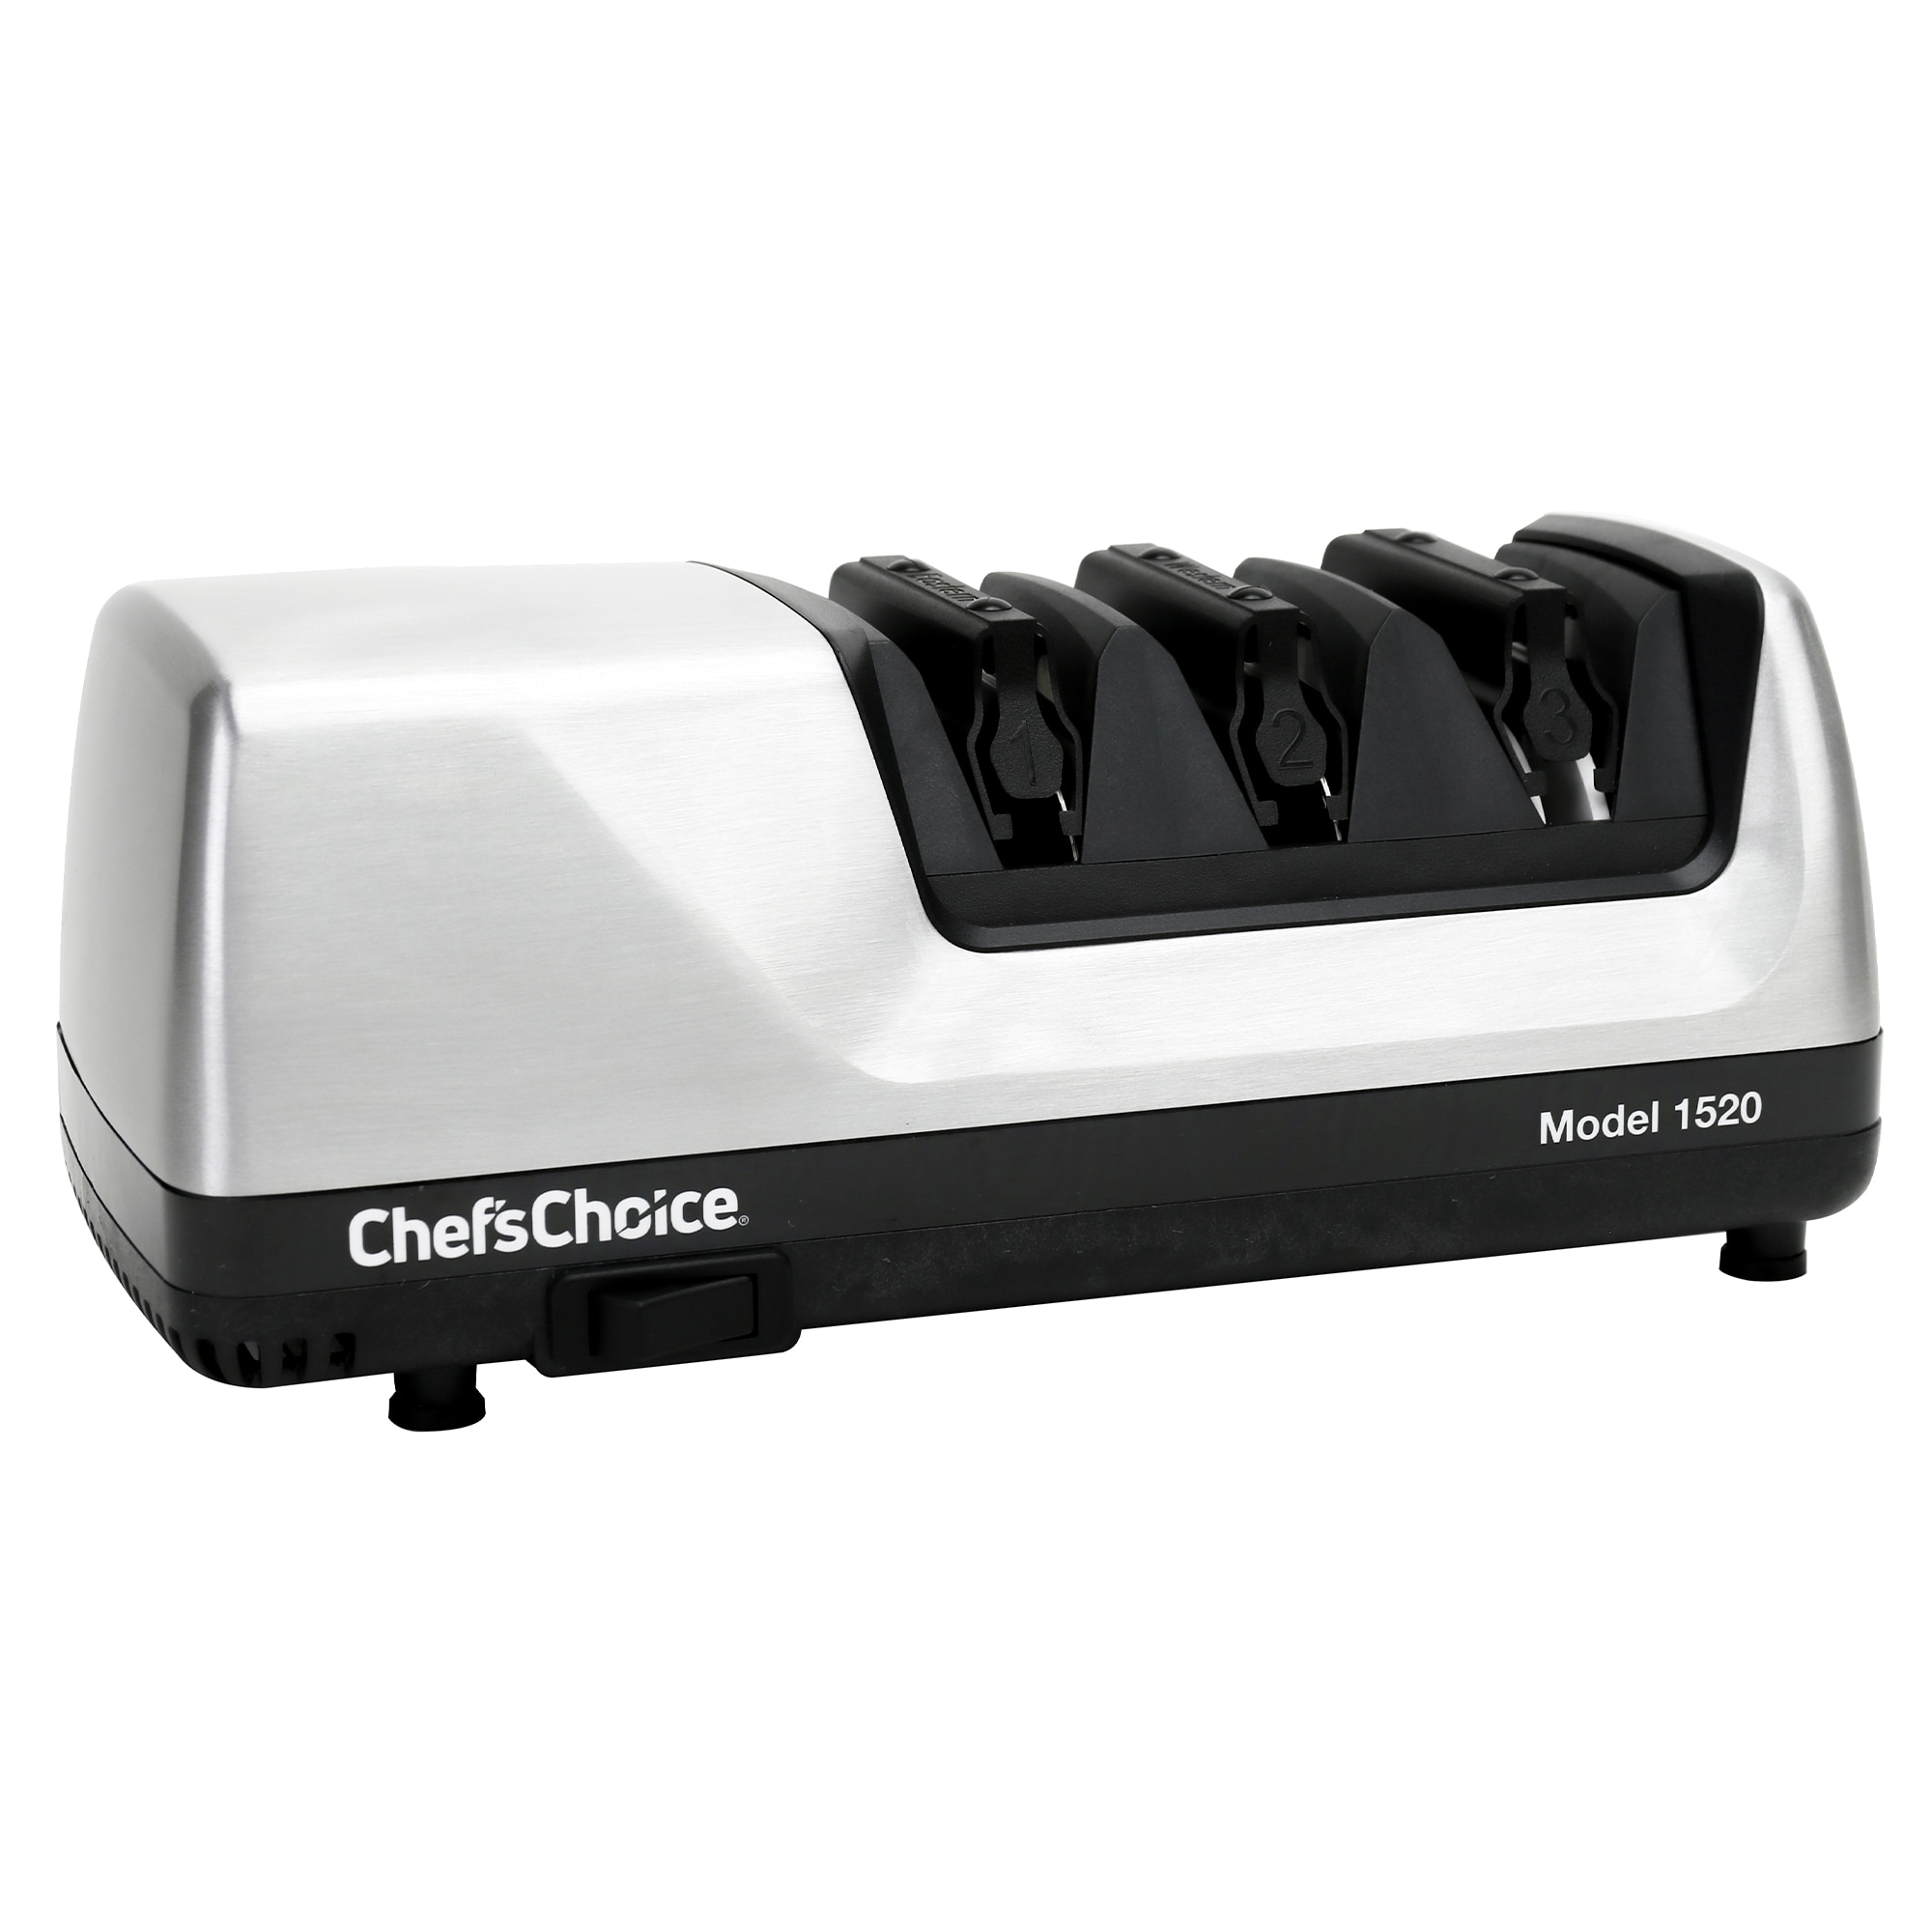 Chef’s Choice Model 1520 AngleSelect Professional Electric Knife Sharpener Brushed Metal